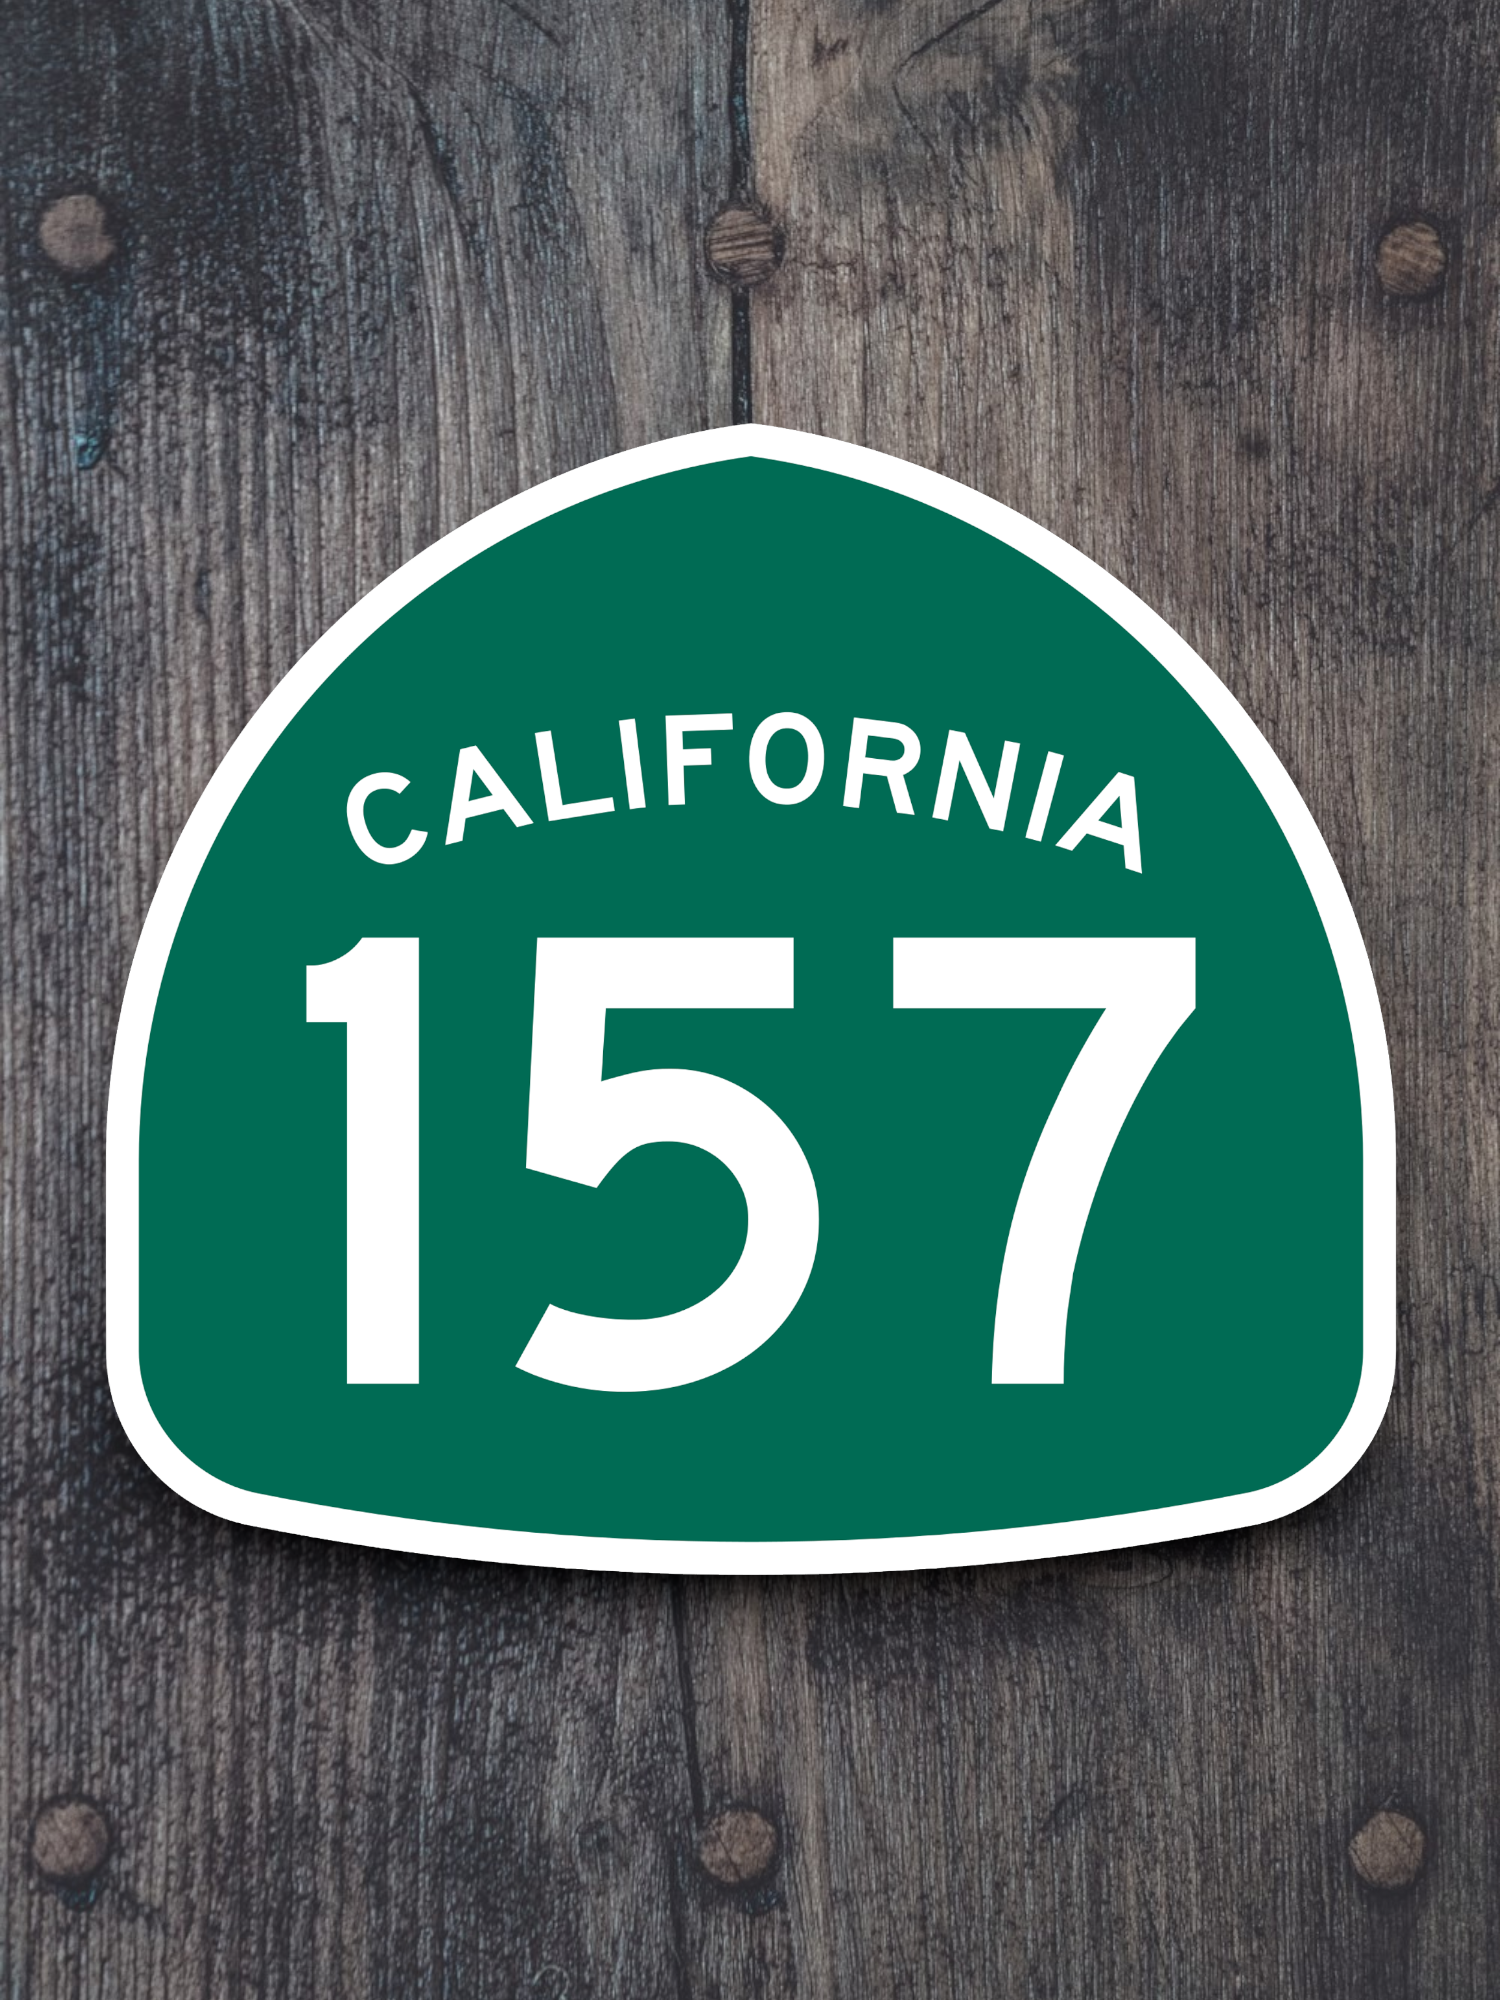 California State Route 157 Road Sign Sticker